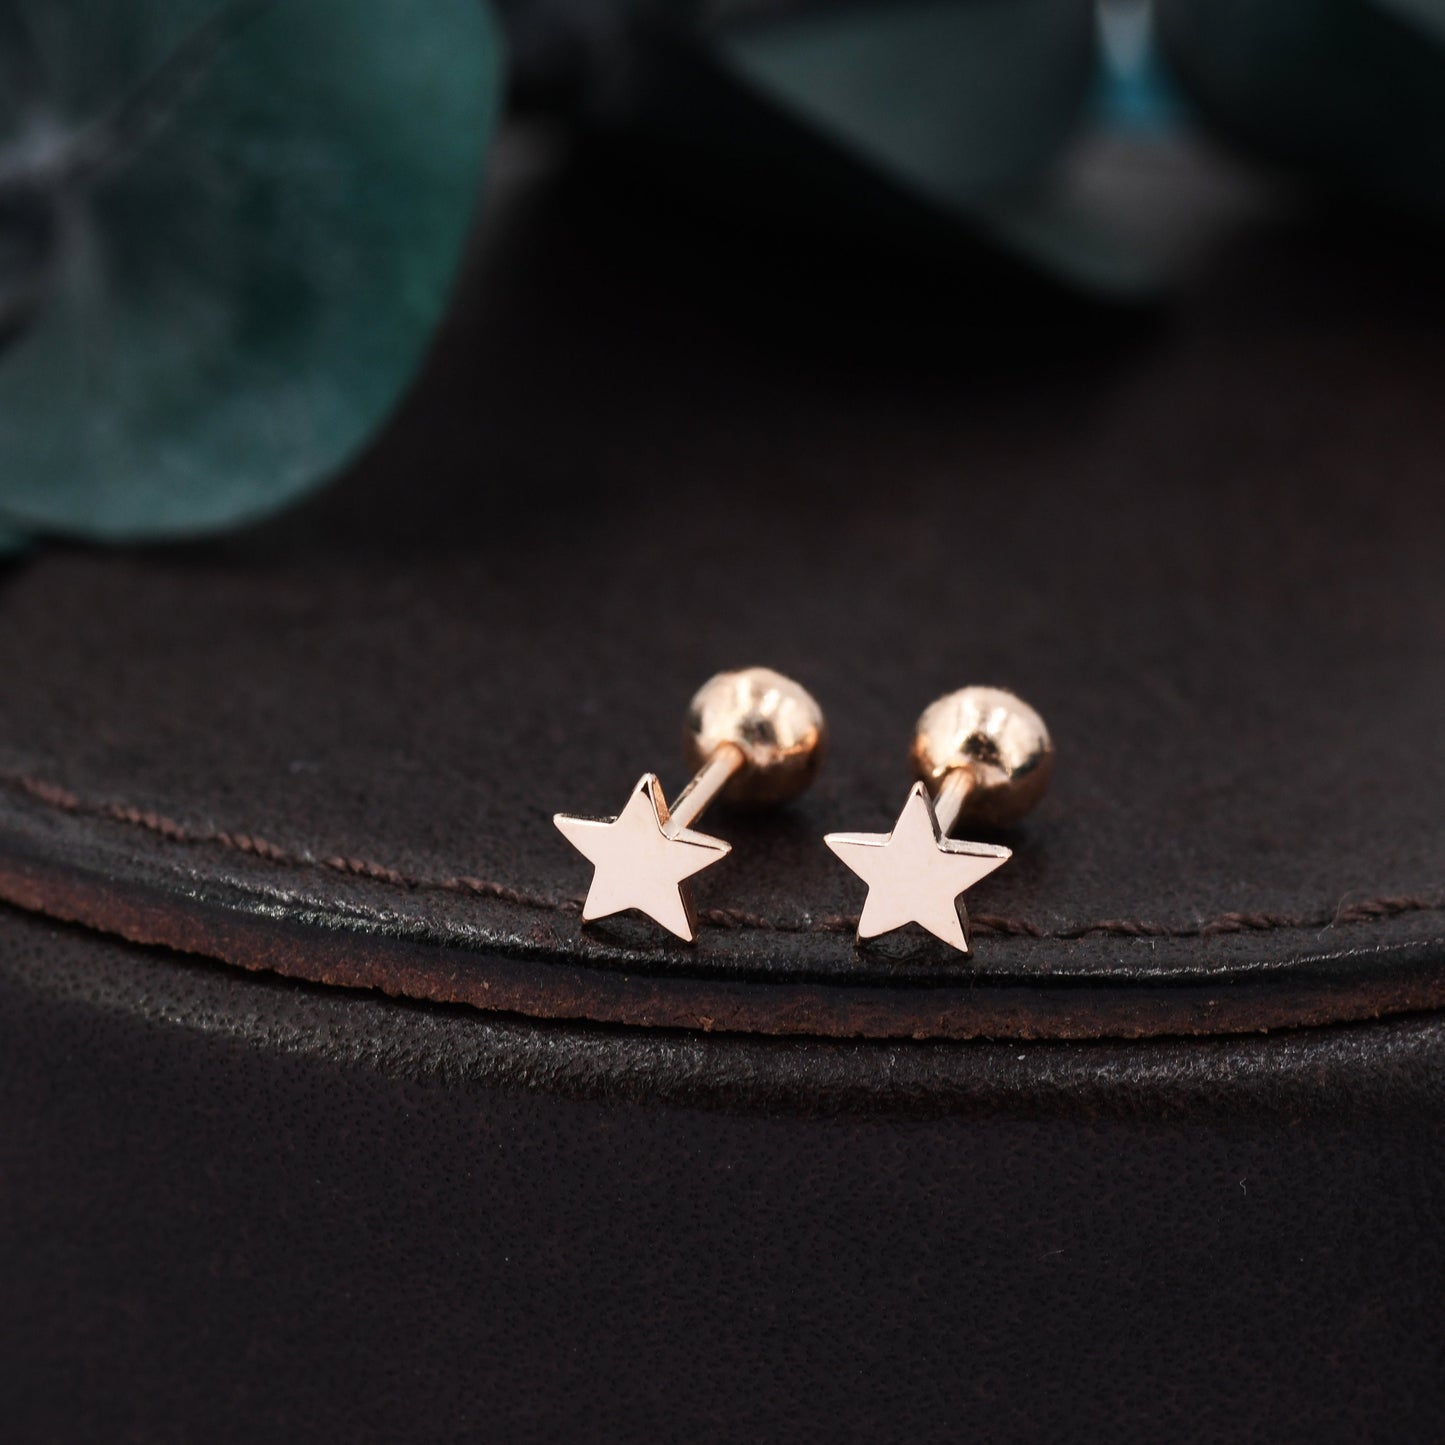 Small Pair of Star Stud Earrings in Sterling Silver, Rose Gold and Silver, Screw Back Earrings - helix ,cartilage , conch, tragus